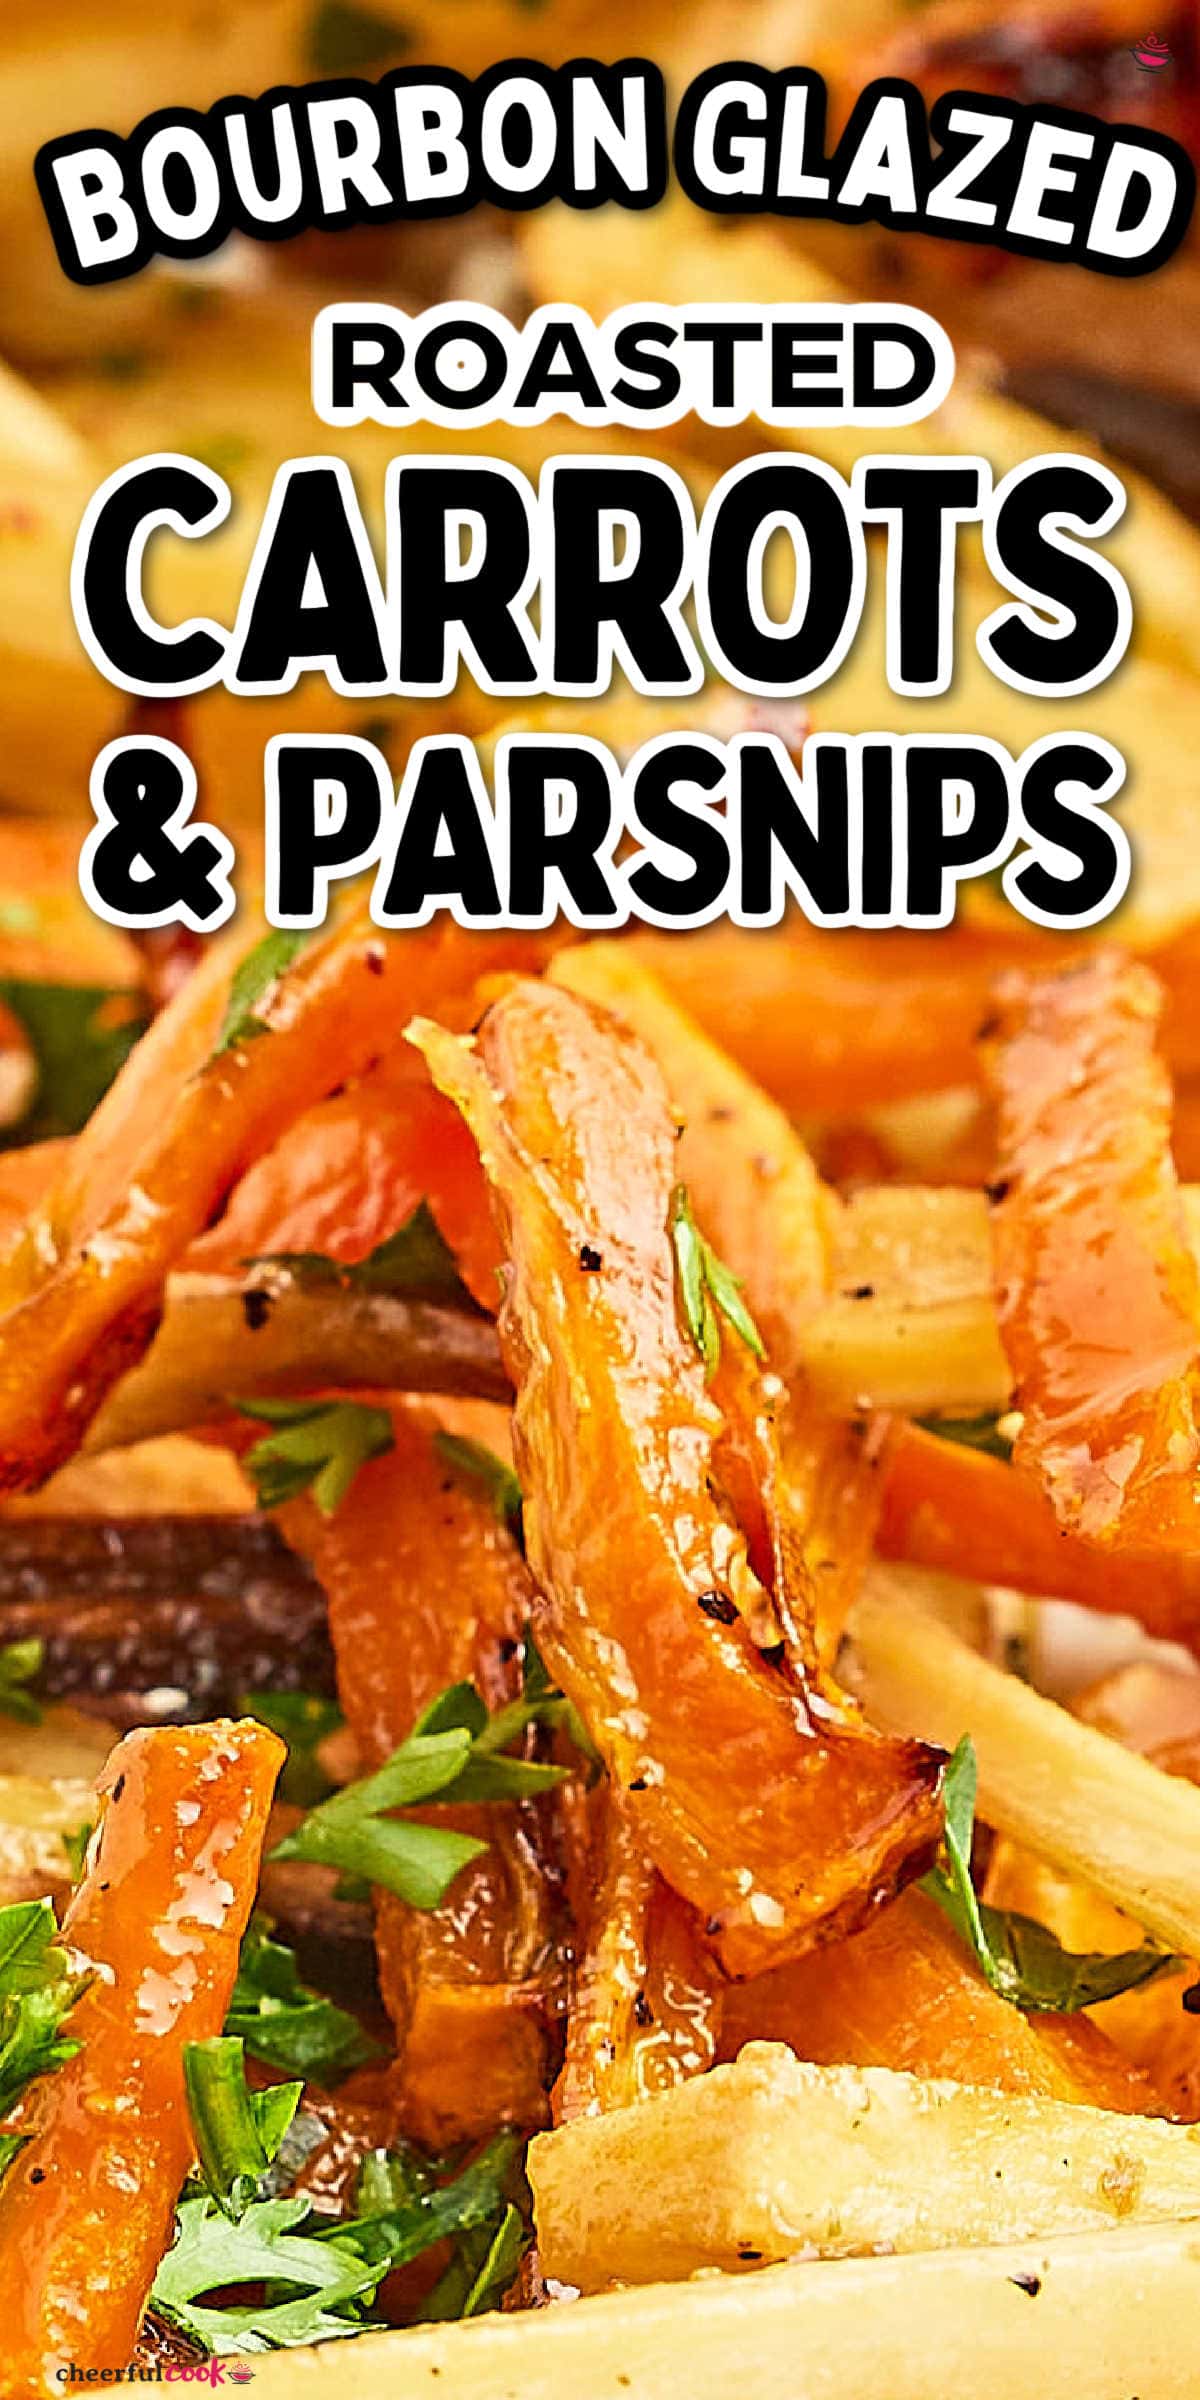 Discover the delightful combo of roasted veggies, brown sugar, and bourbon with this easy-to-follow recipe. Perfect for a homely dinner, the earthy flavors of carrots and parsnips come alive with a sweet, boozy glaze. #cheerfulcook #carrotsandparsnips #ovenroasted #roastedvegetables #vegetariansidedish #easyrecipe #ovenroastedvegetables via @cheerfulcook